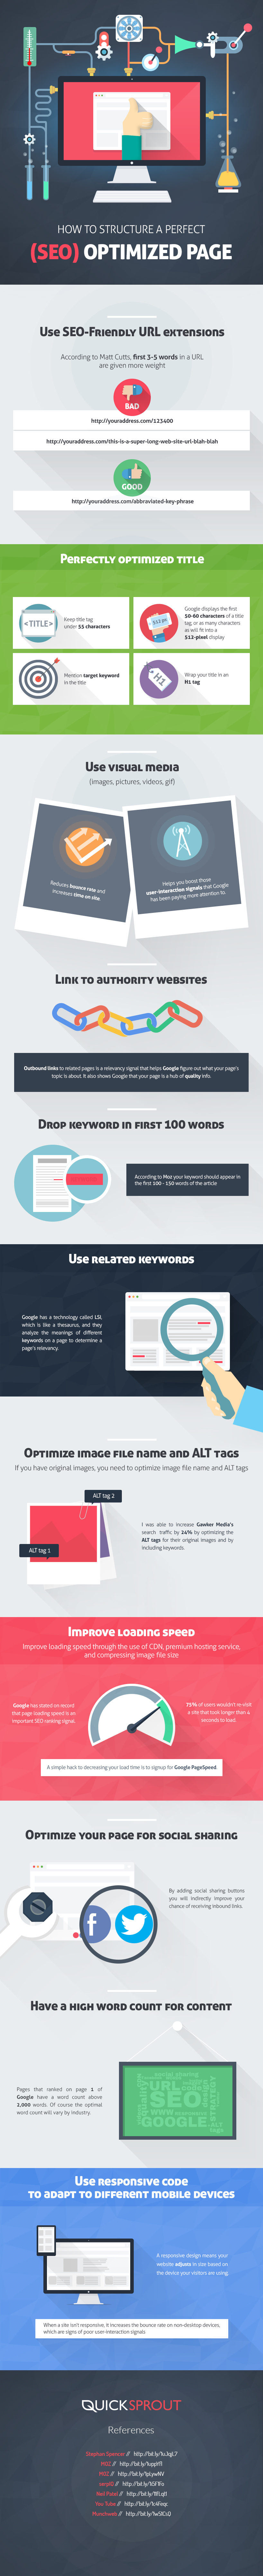 The-Perfect-On-Page-SEO-Checklist-for-2016-Infographic_jpg